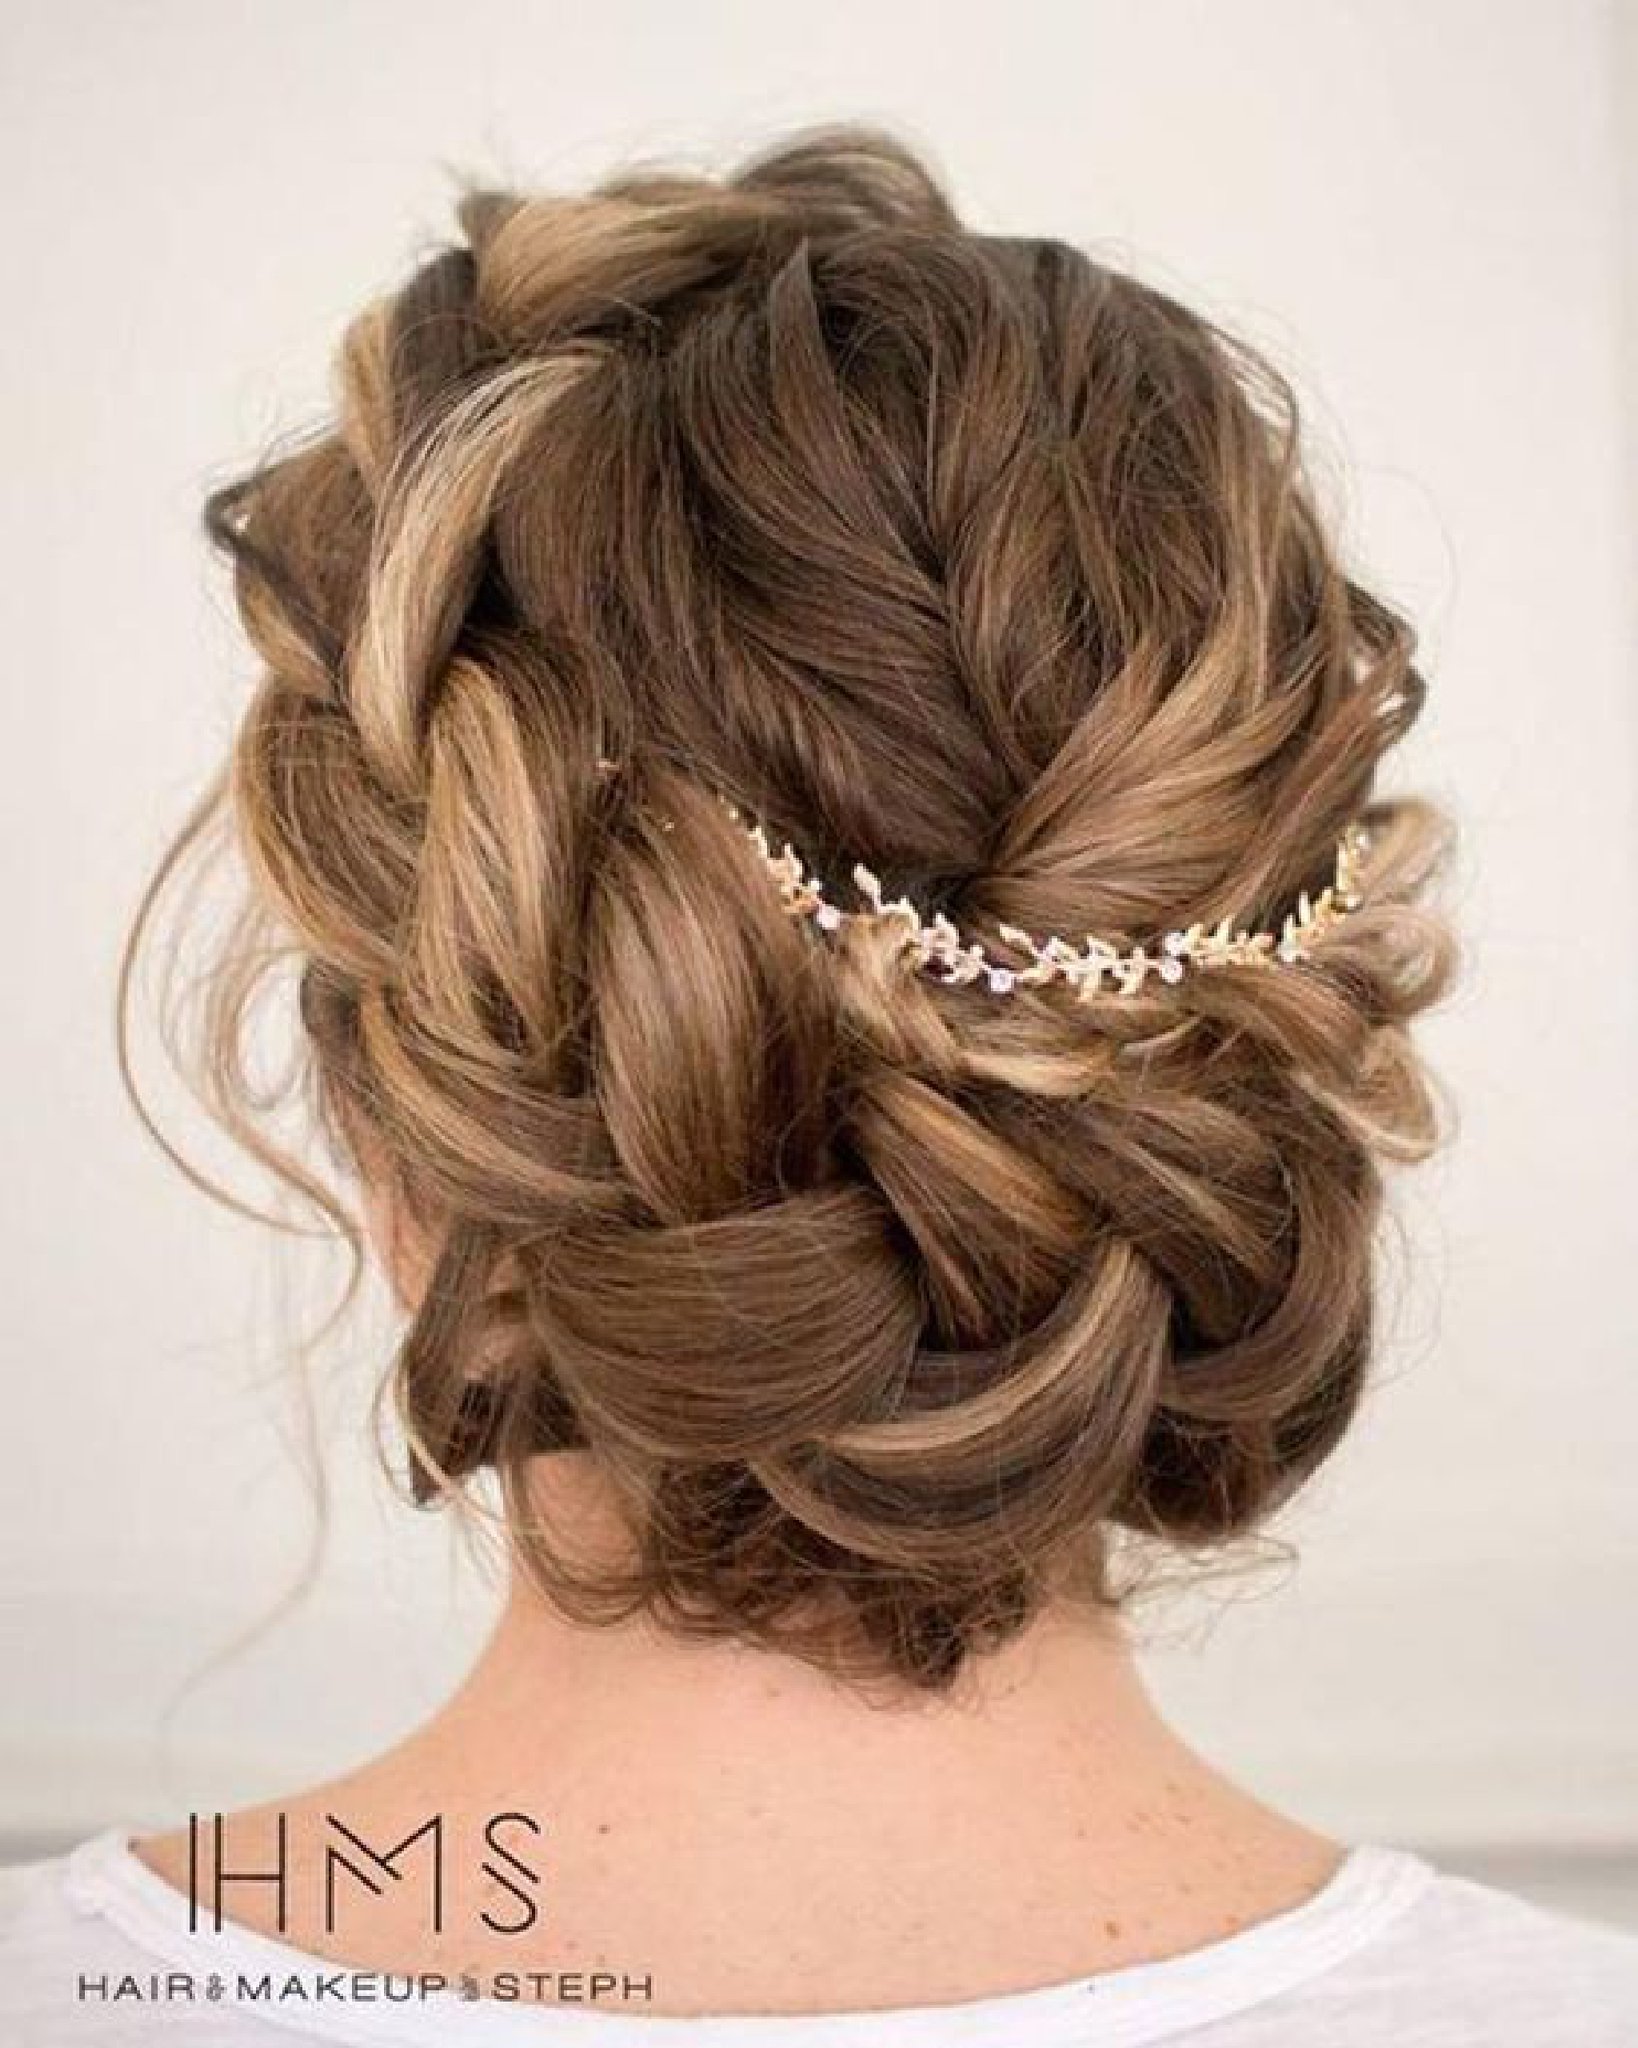 Instagram Hair Accounts every bride-to-be should follow — Bridal Hair  Collective